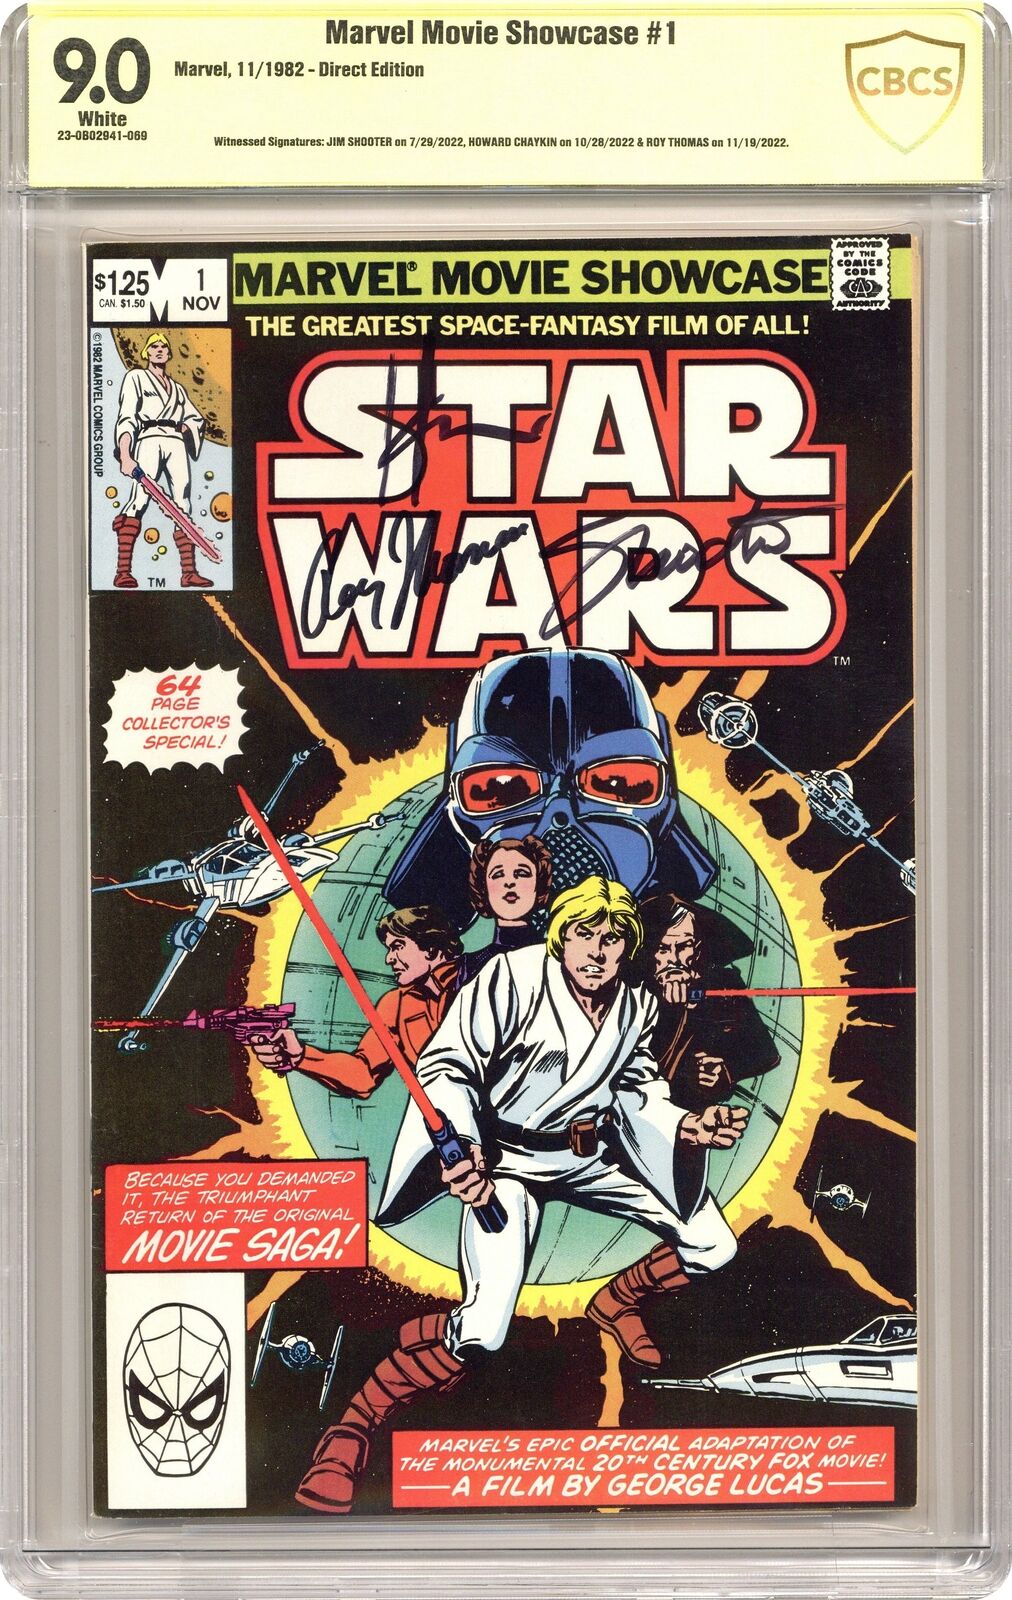 Marvel Movie Showcase Featuring Star Wars #1 CBCS 9.0 SS 1982